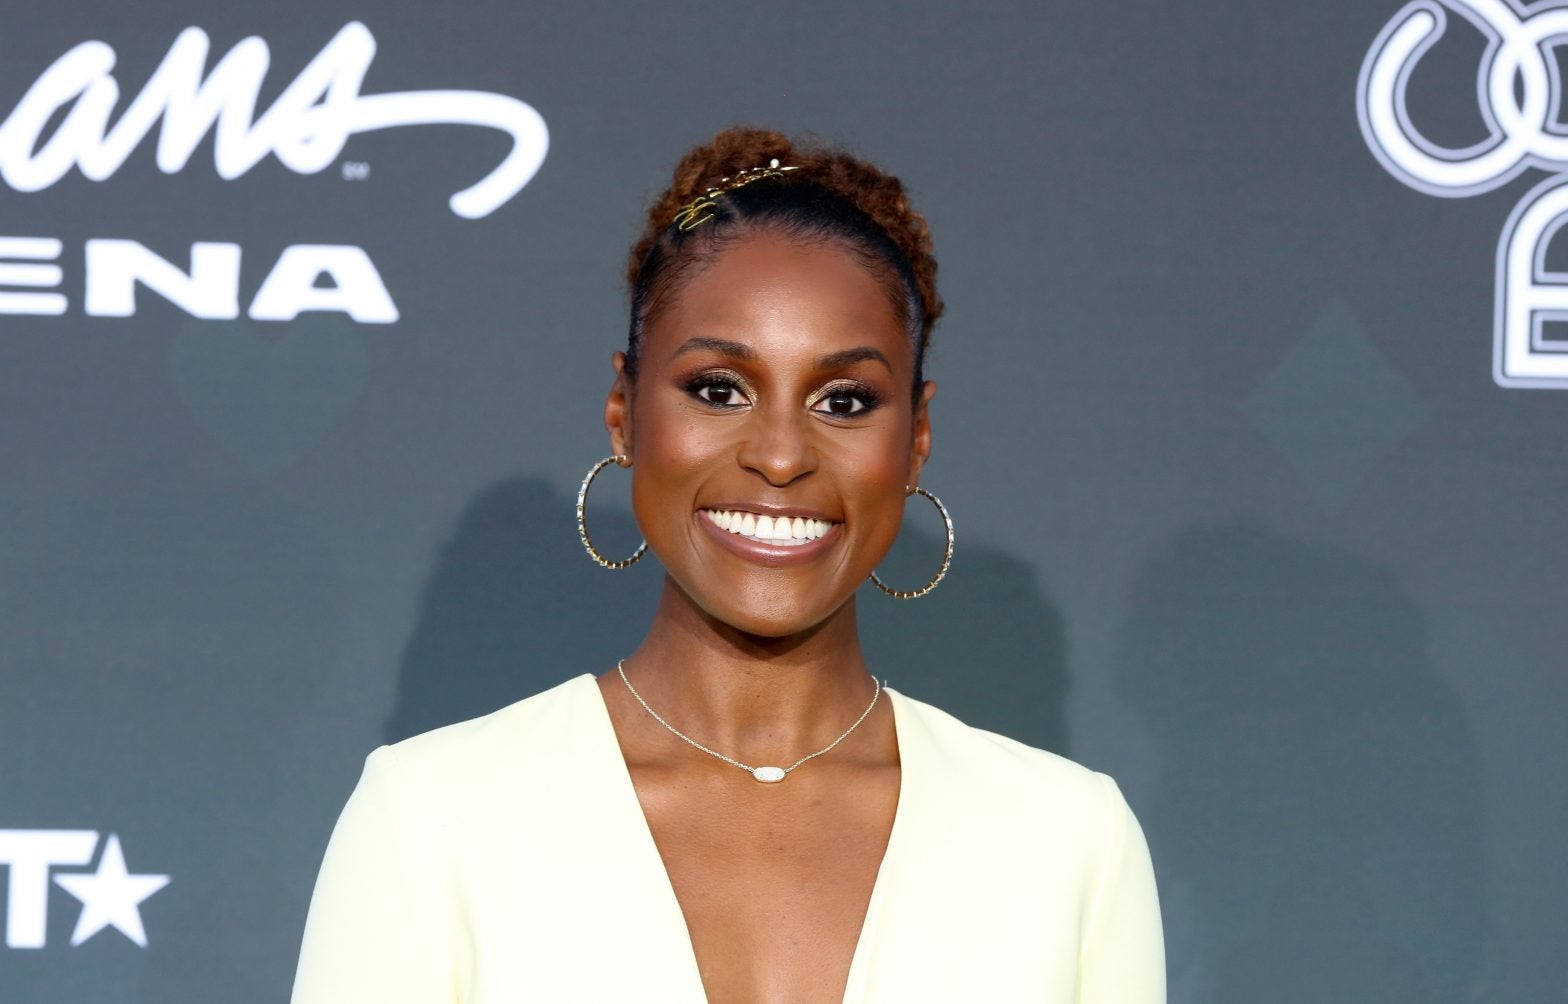 Issa Rae Highlighted The Lack Of Women In This Year’s Oscar Nominees For Best Director: 'Congrats To Those Men'